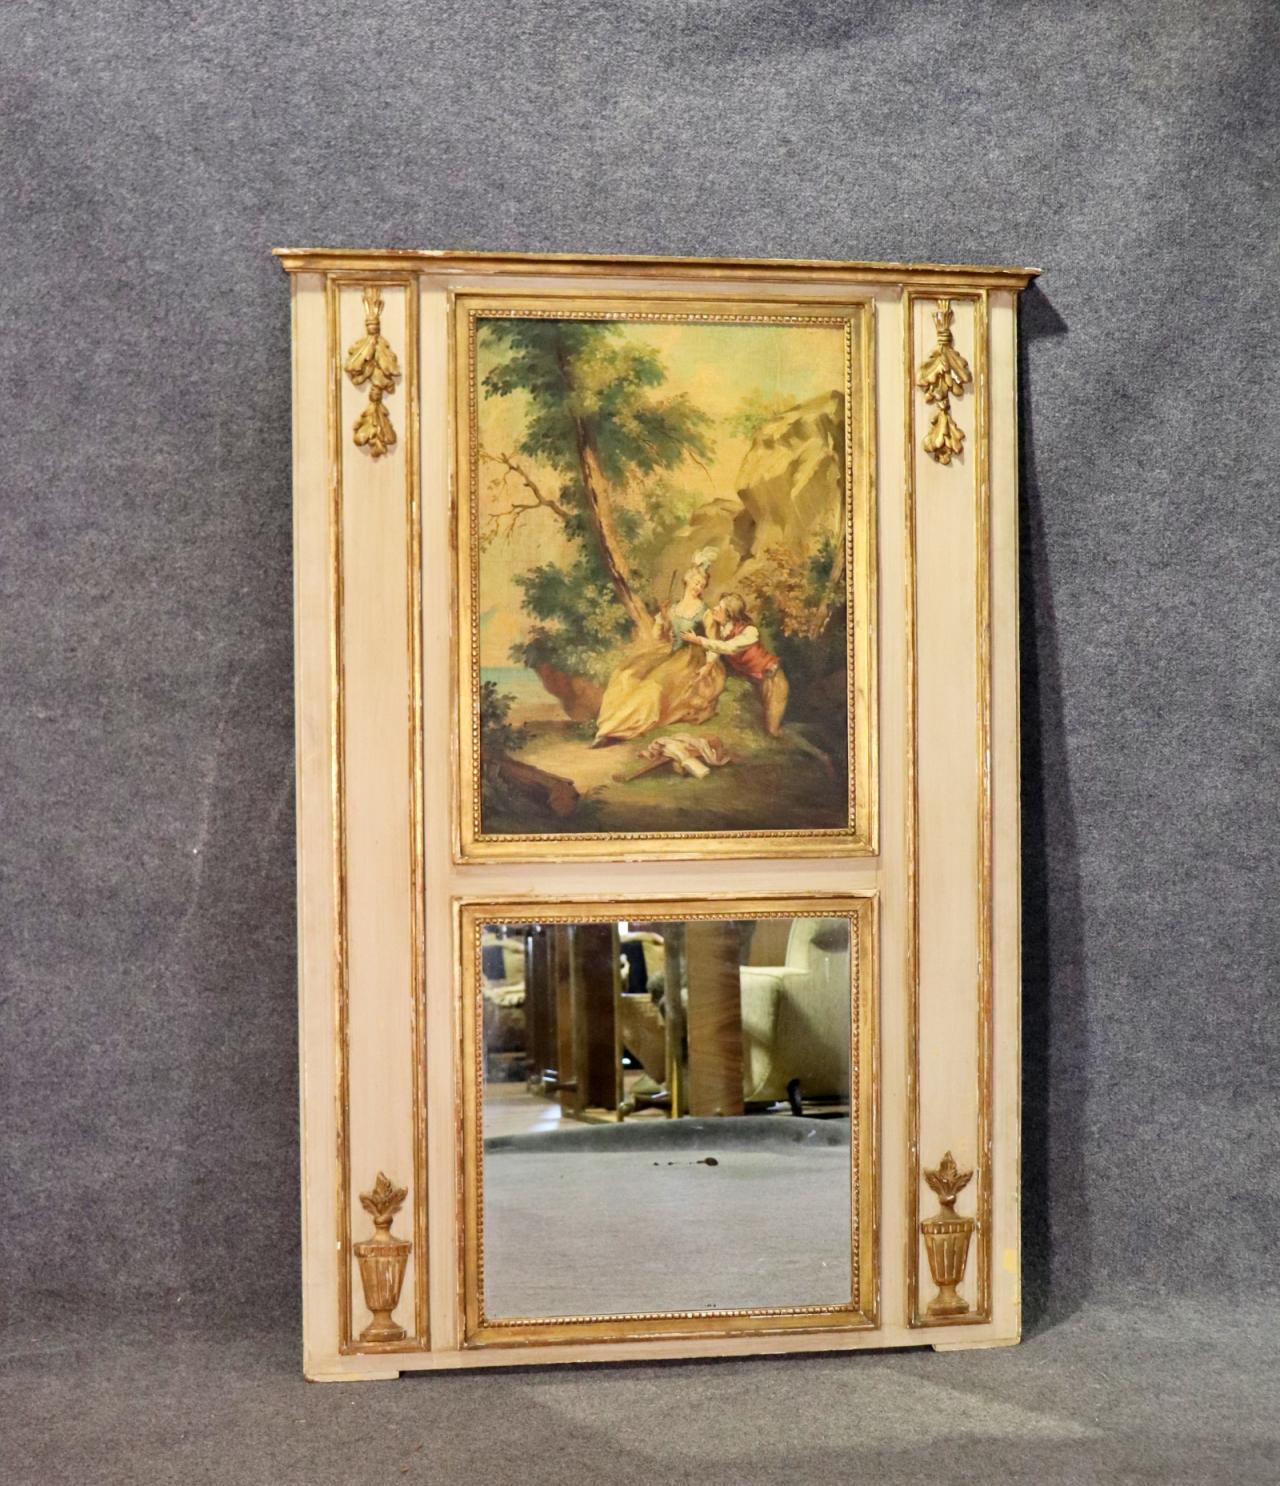 Louis XV Monumental Antique French Painted Trumeau Mirror With Courtship Scenery  For Sale